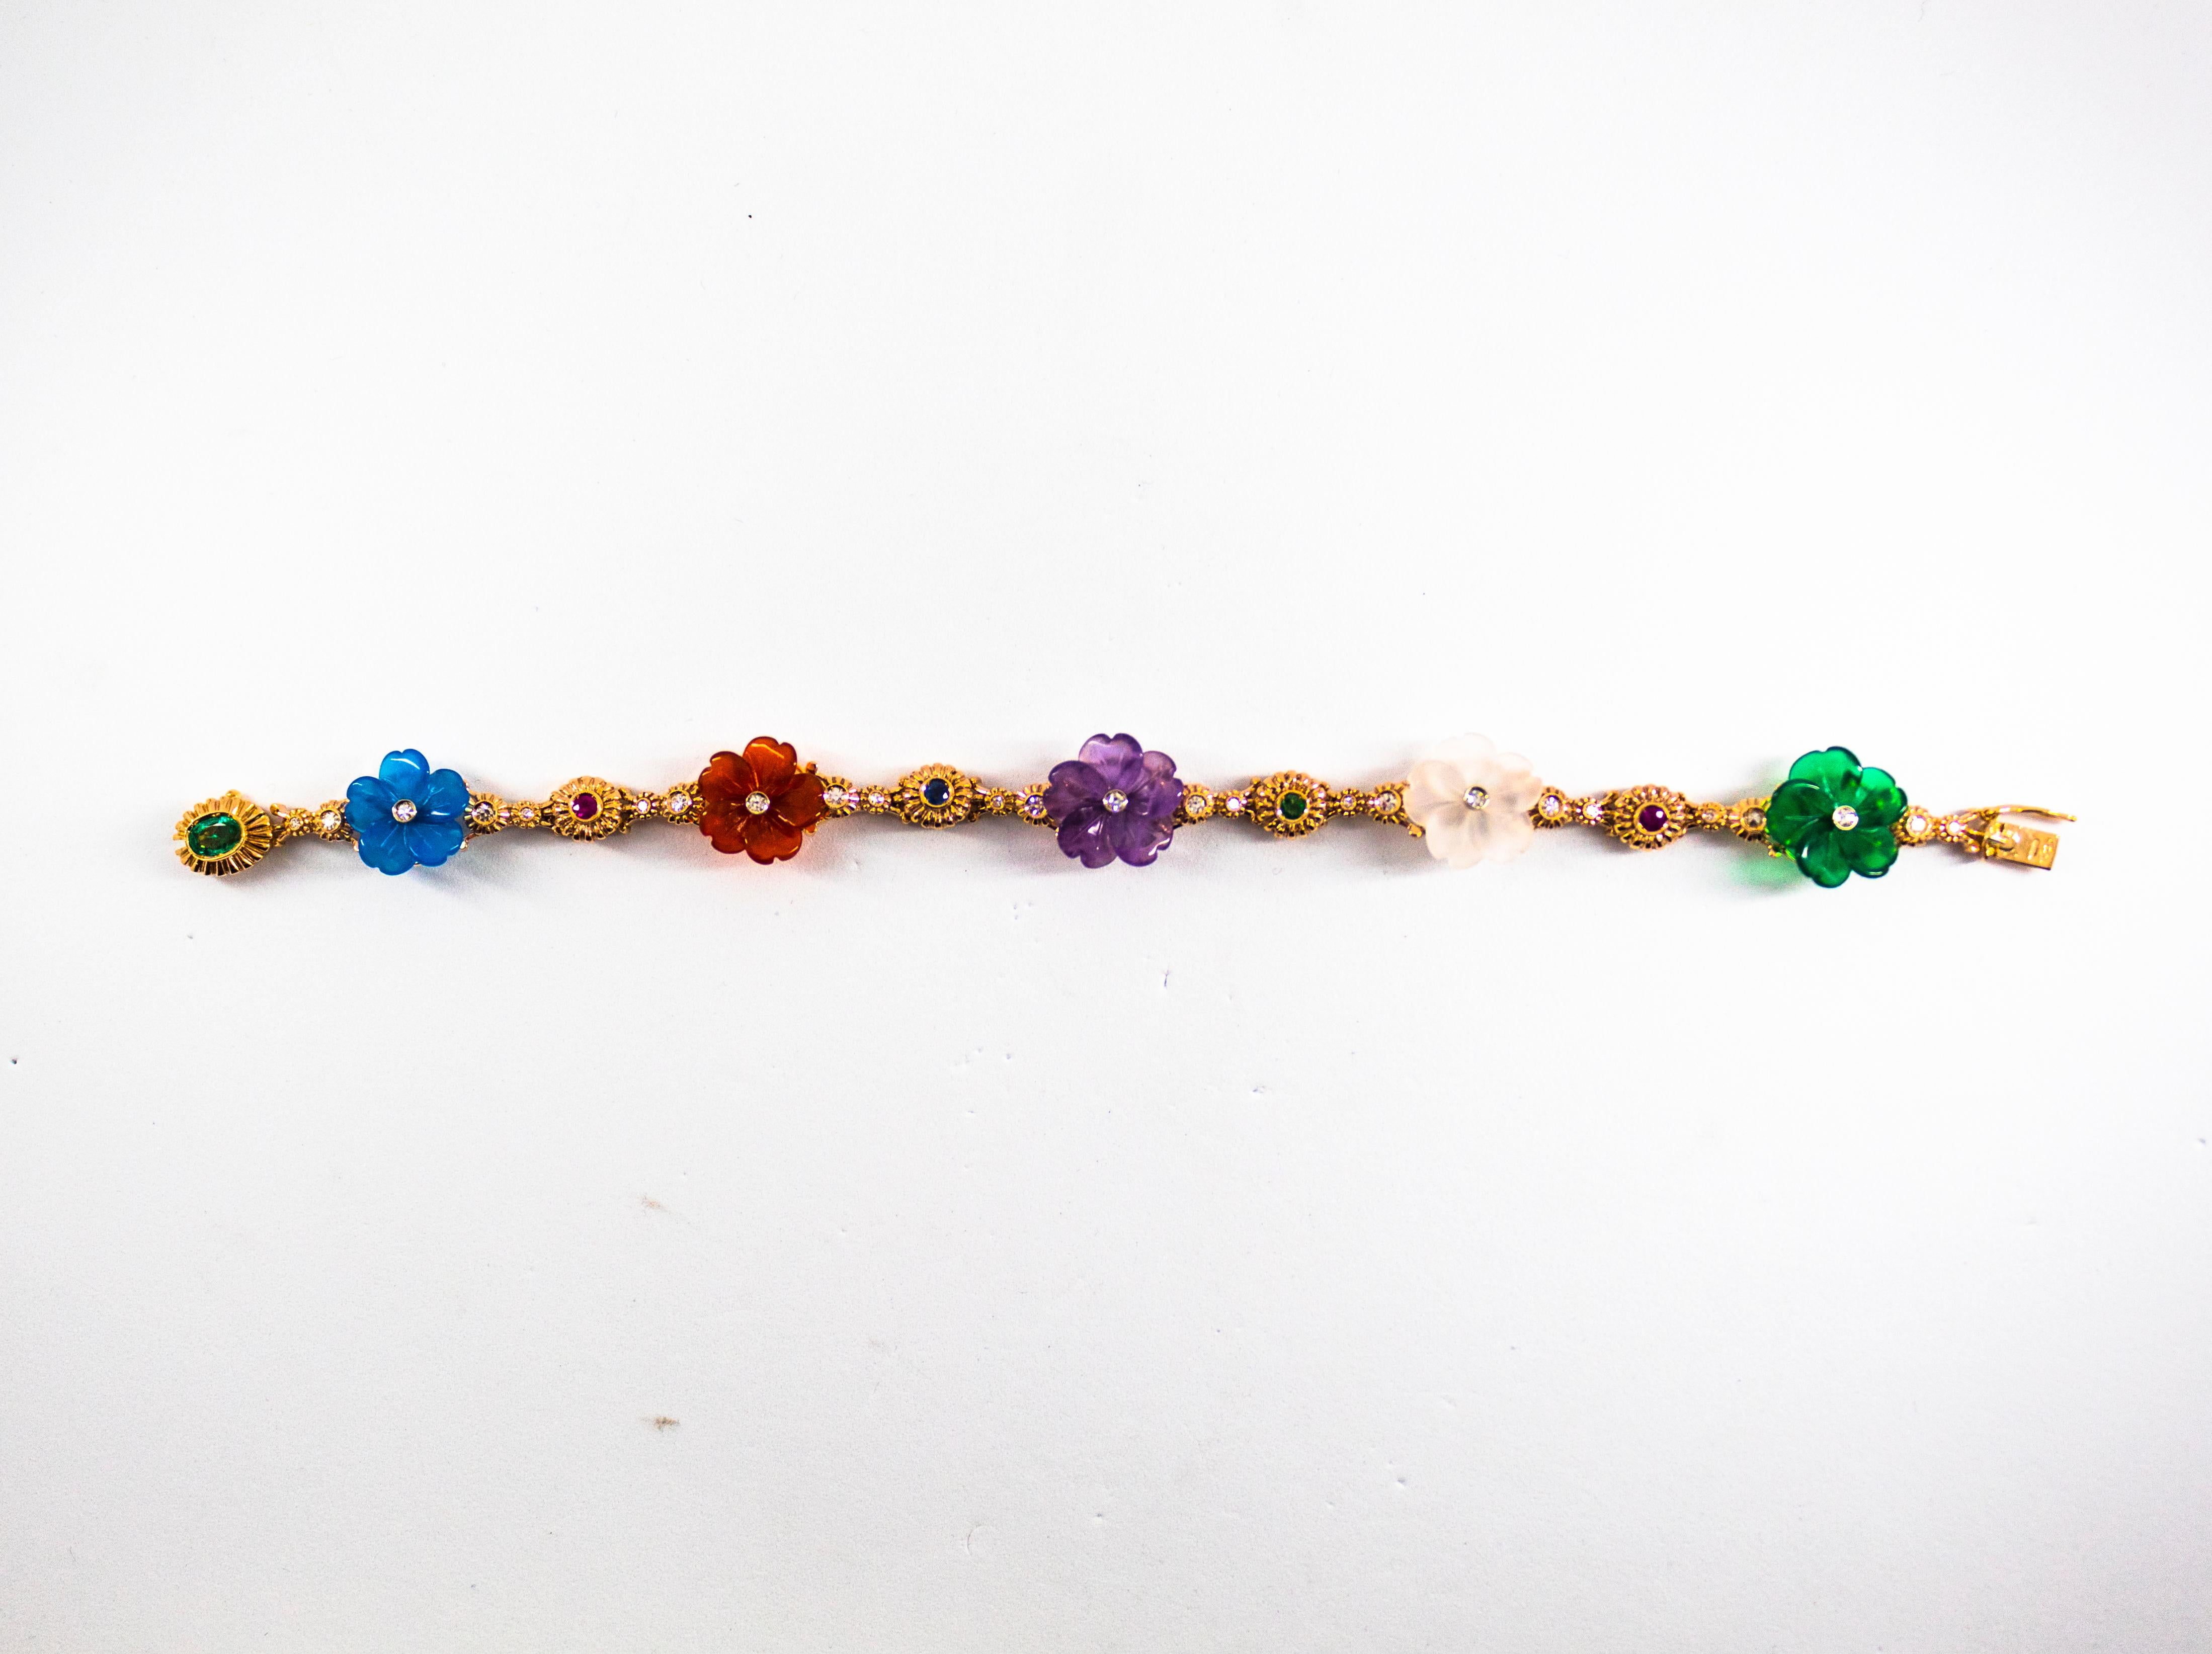 This bracelet is made of 14k Yellow Gold.
This bracelet has 0.45 Carats of White Diamonds.
This bracelet has 0.80 Carats of Rubies, Emeralds and Blue Sapphires.
This bracelet has also Rock Crystal, Agate, Amethyst.
We're a workshop so every piece is